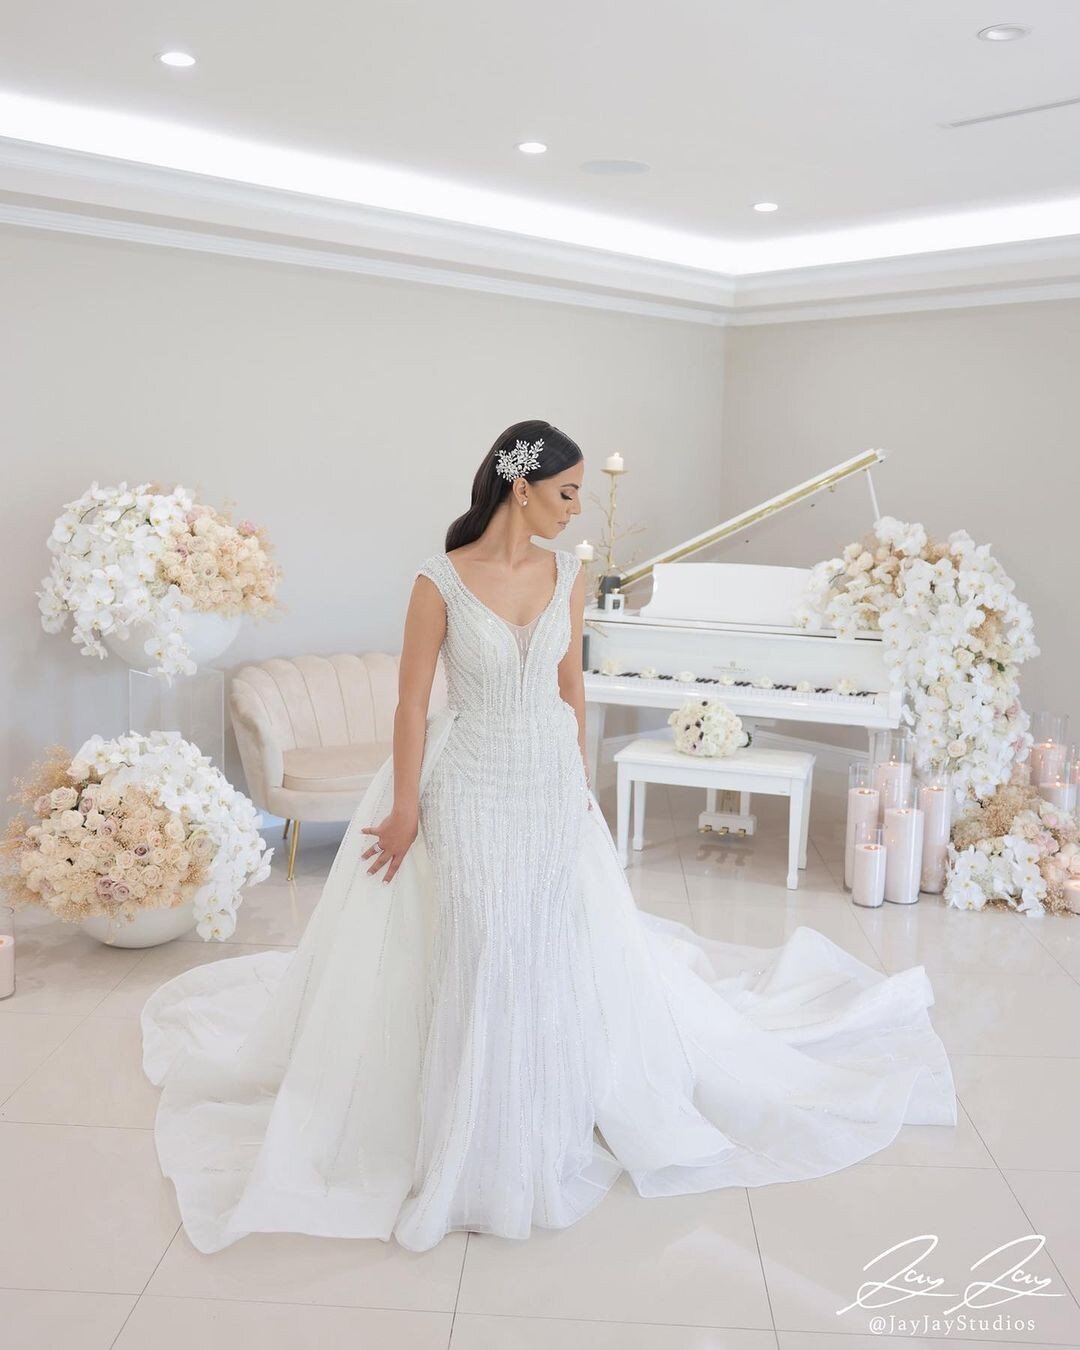 The bride looked fabulous from every angle in her custom Mayana Bridals gown ✨ Find &ldquo;The One&quot; at MayanaBridals.com

Captured by: @Jayjaystudios

Appointments: MayanaBridals.com/Contact

info@mayanabridals.com
(747) 202-5555

120 E Broadway